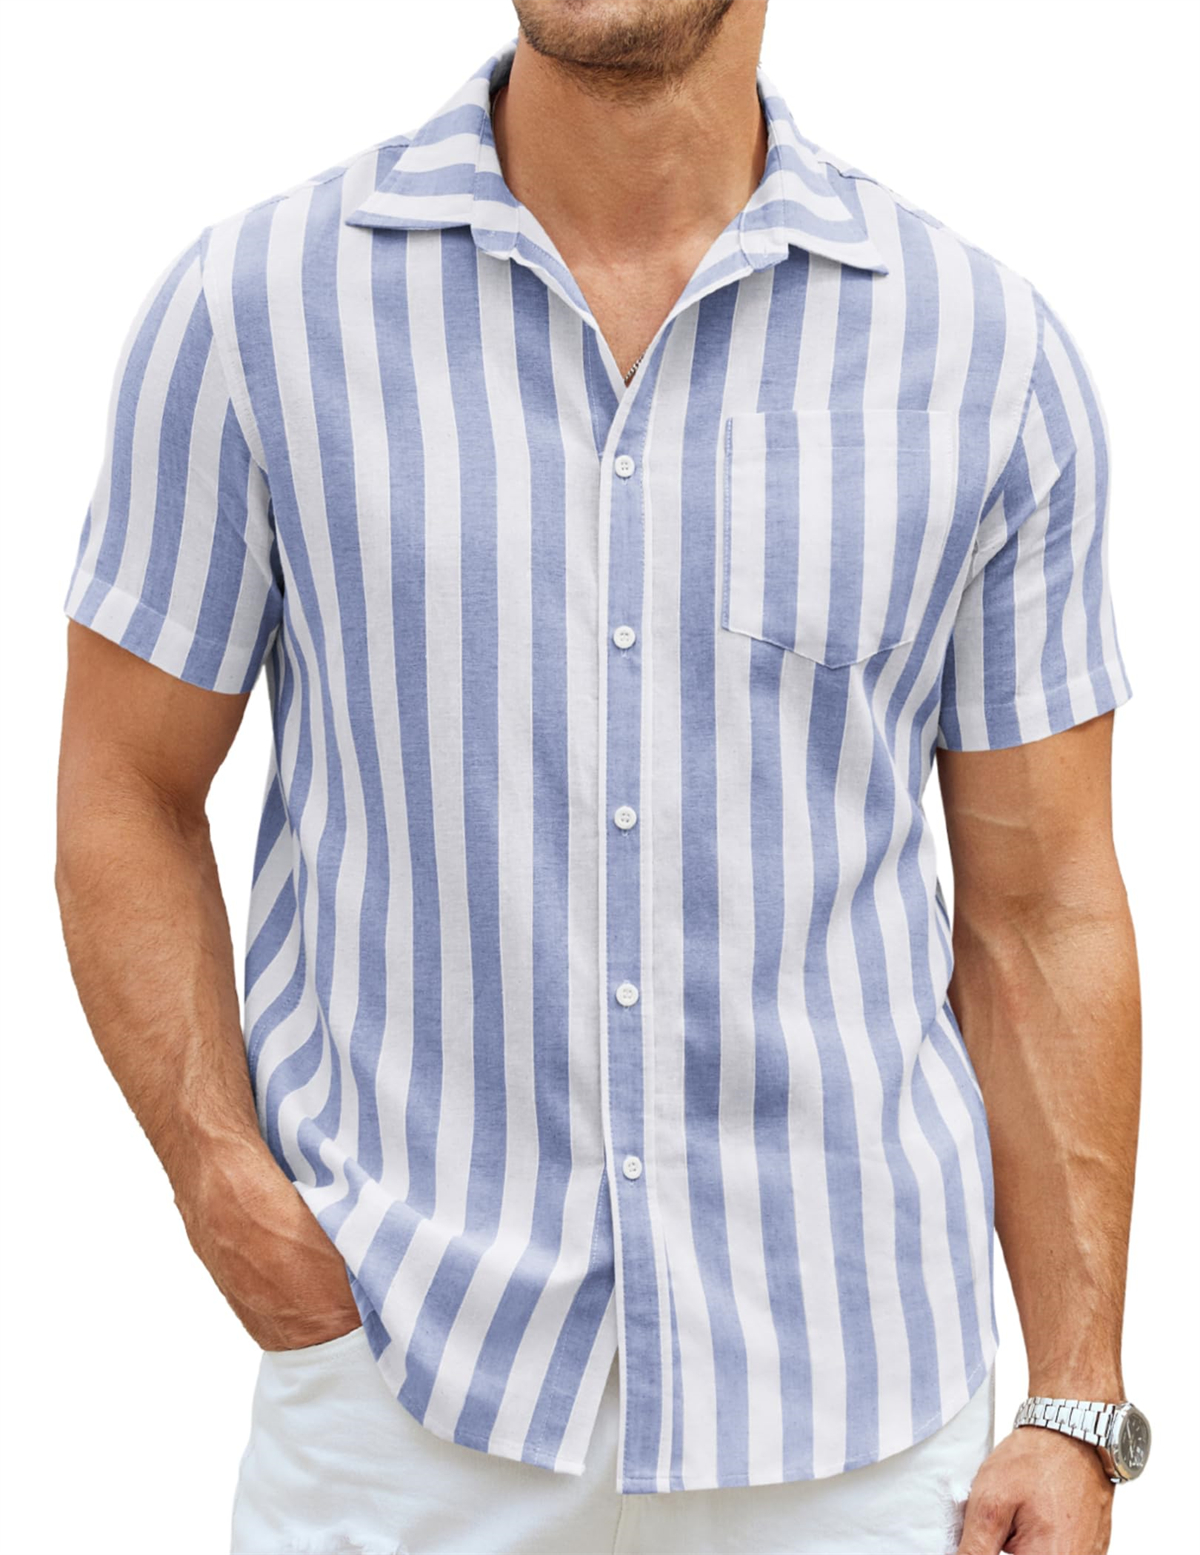 Men's Striped  Printed Casual Short-sleeved Shirt